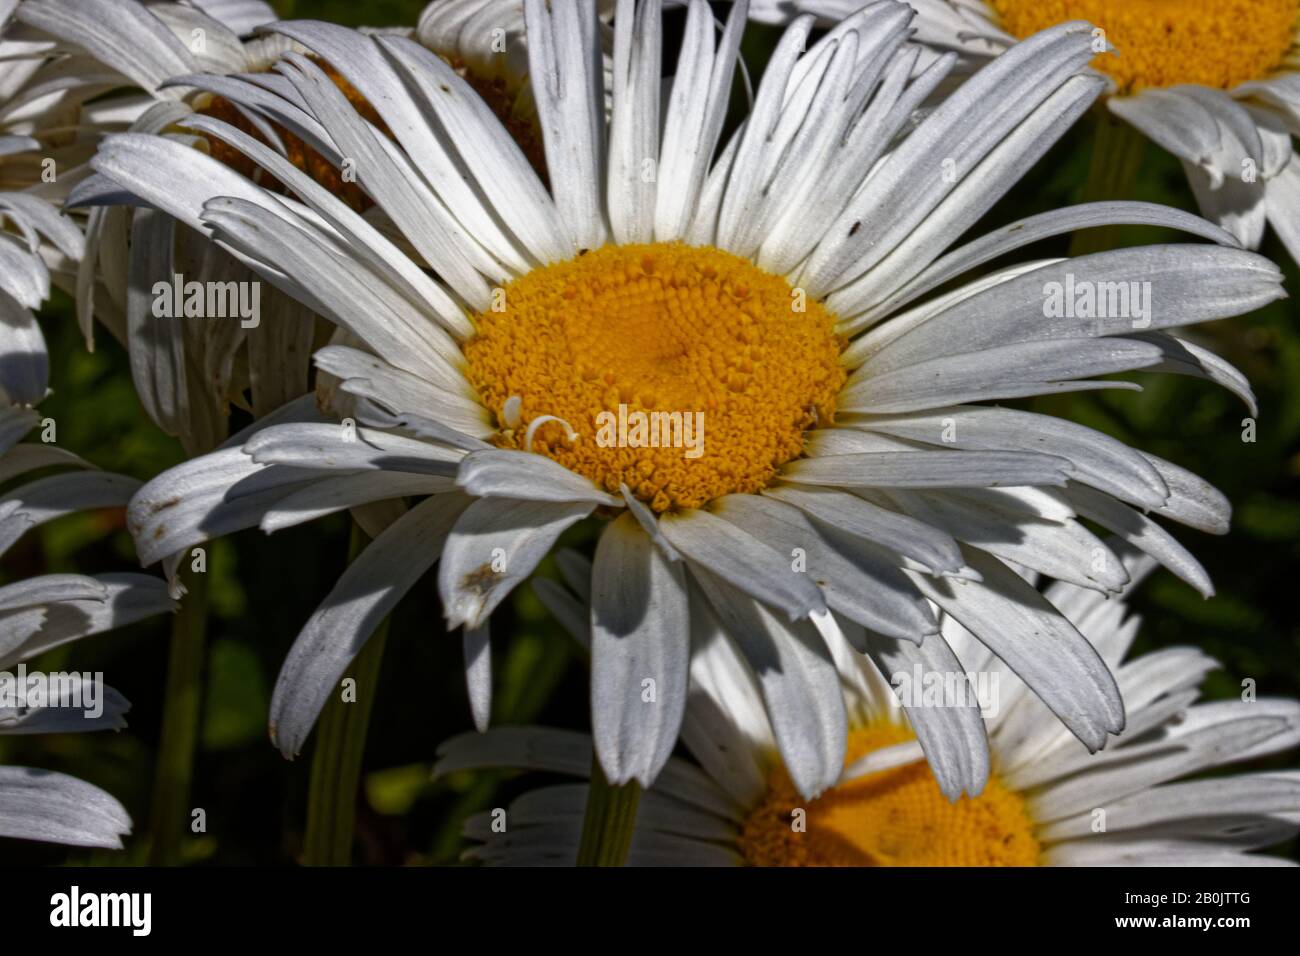 Leucanthemum is a genus of flowering plants in the aster family, Asteraceae. It is mainly distributed in southern and central Europe. Stock Photo